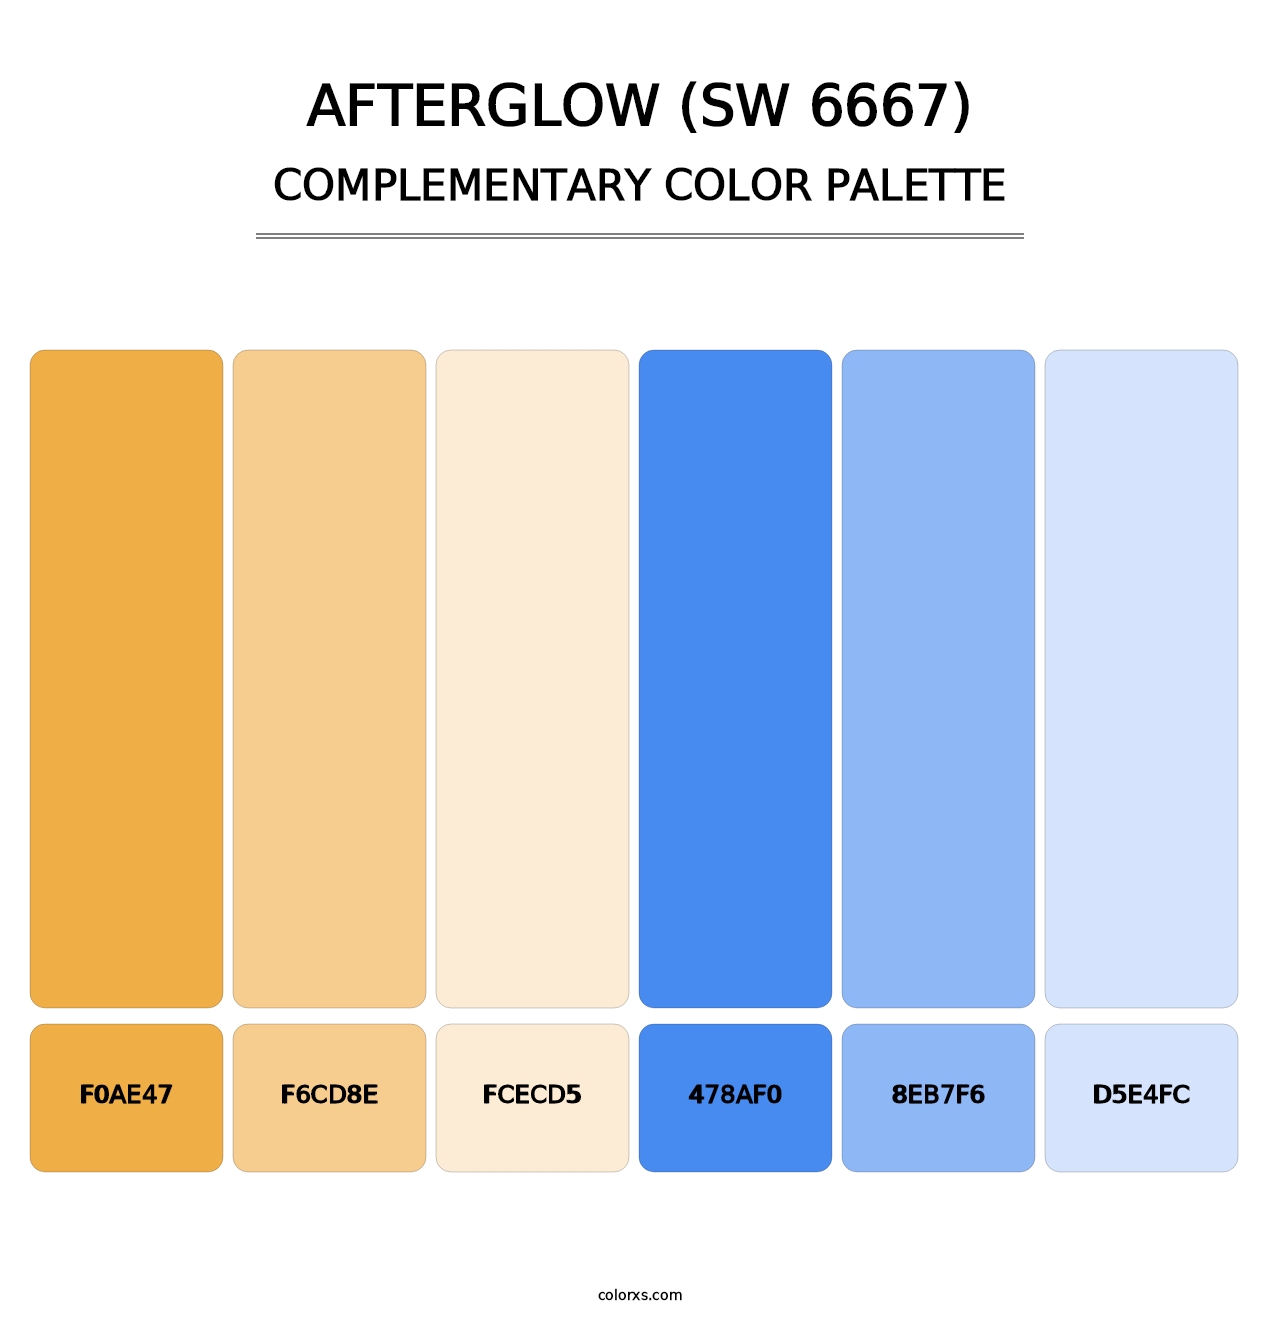 Afterglow (SW 6667) - Complementary Color Palette